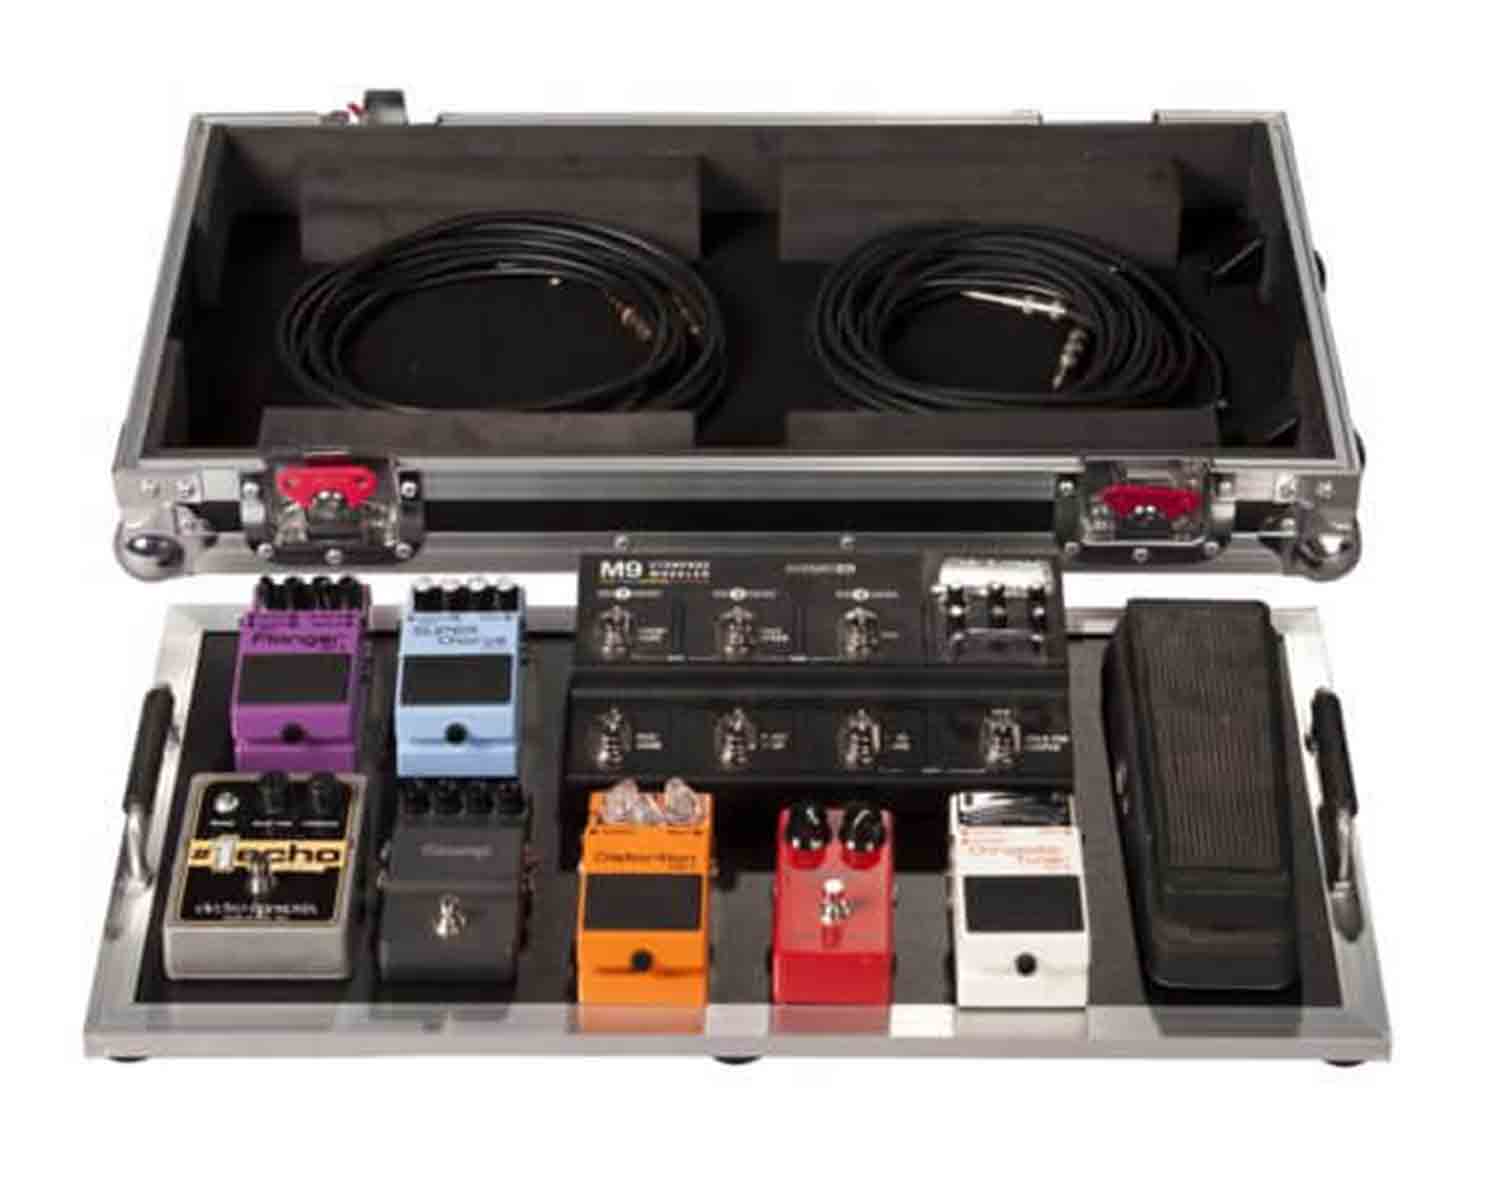 Gator G-TOUR PEDALBOARD-LGW Large Pedal Board and Flight Case for 10-14 Pedals - Hollywood DJ